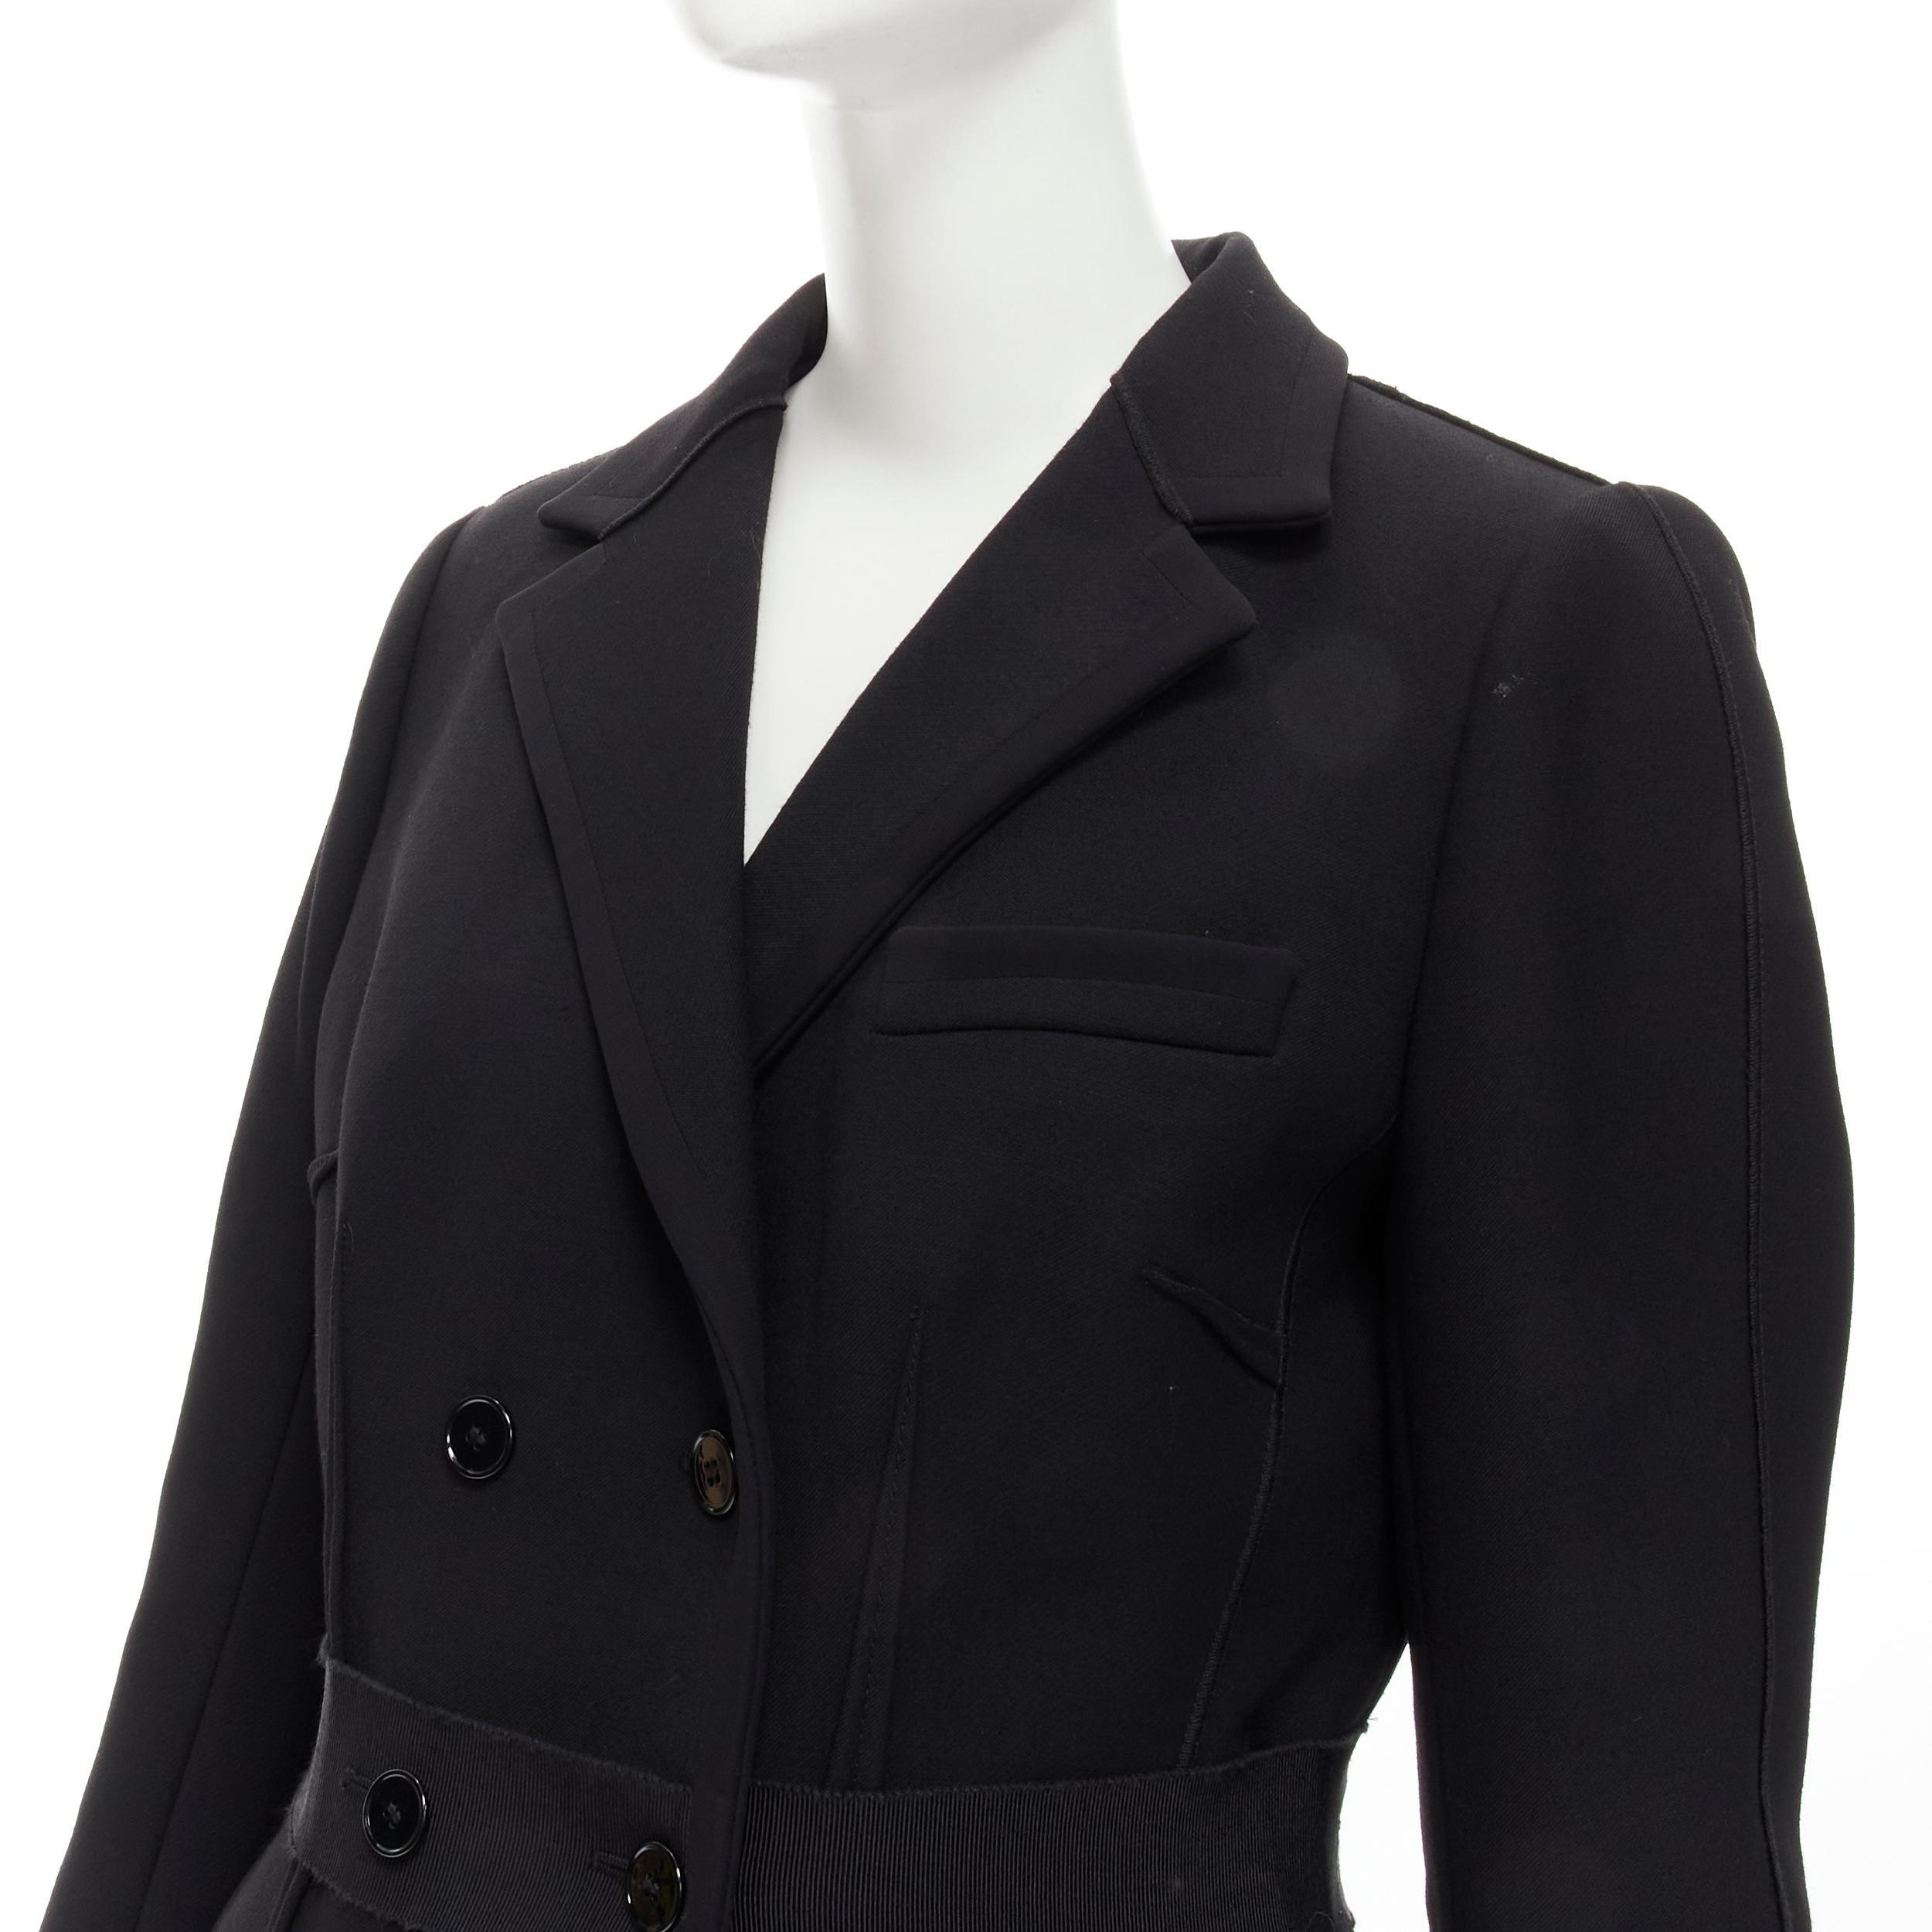 DOLCE GABBANA Vintage black virgin wool reversed seam blazer jacket skirt IT44 M 
Reference: GIYG/A00181 
Brand: Dolce Gabbana 
Material: Wool 
Color: Black 
Pattern: Solid 
Closure: Button 
Extra Detail: Designed to look like the blazer was worn